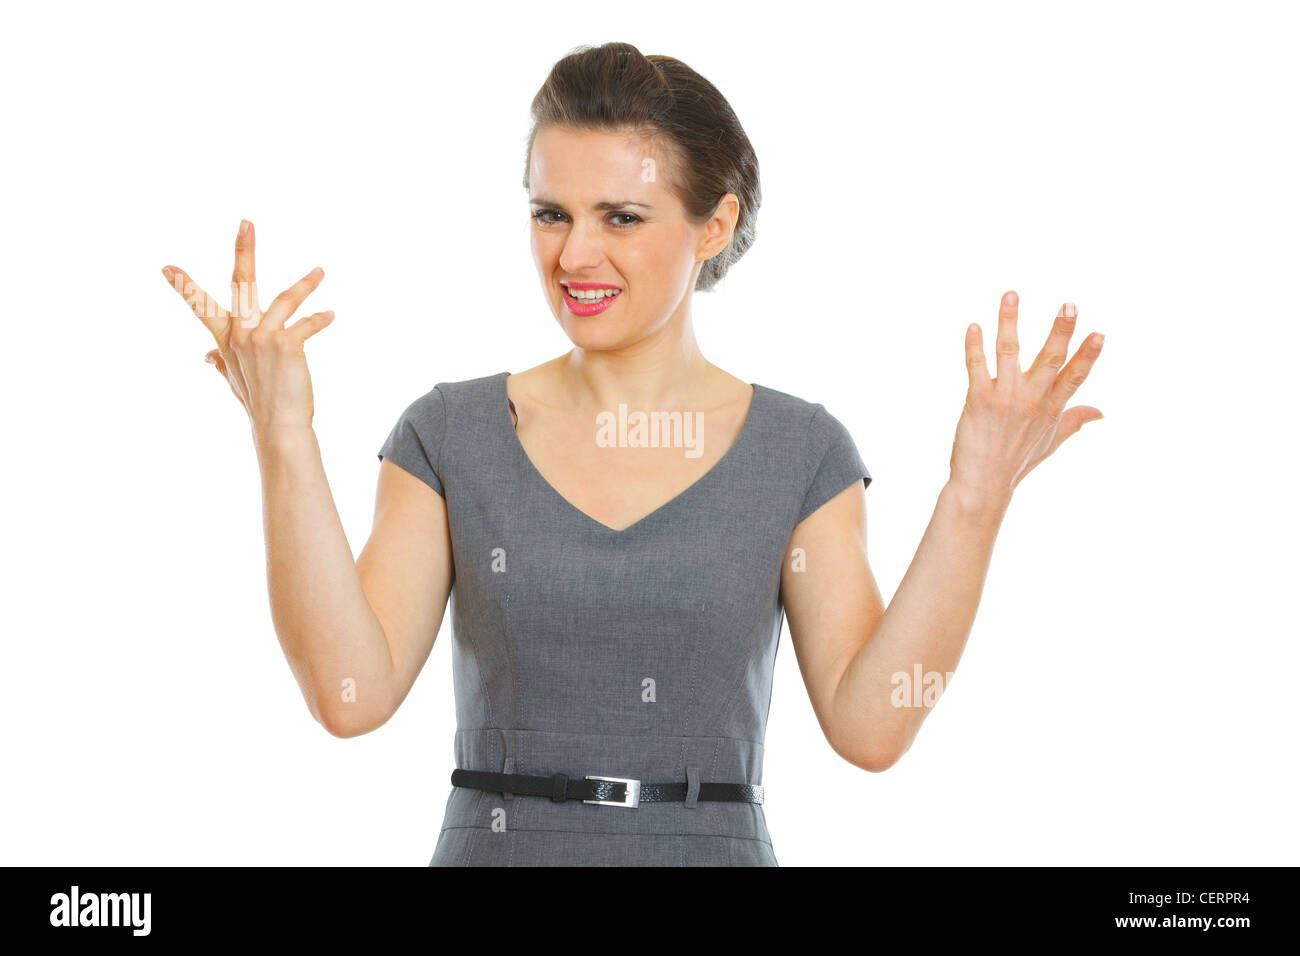 Portrait of resenting woman Stock Photo - Alamy